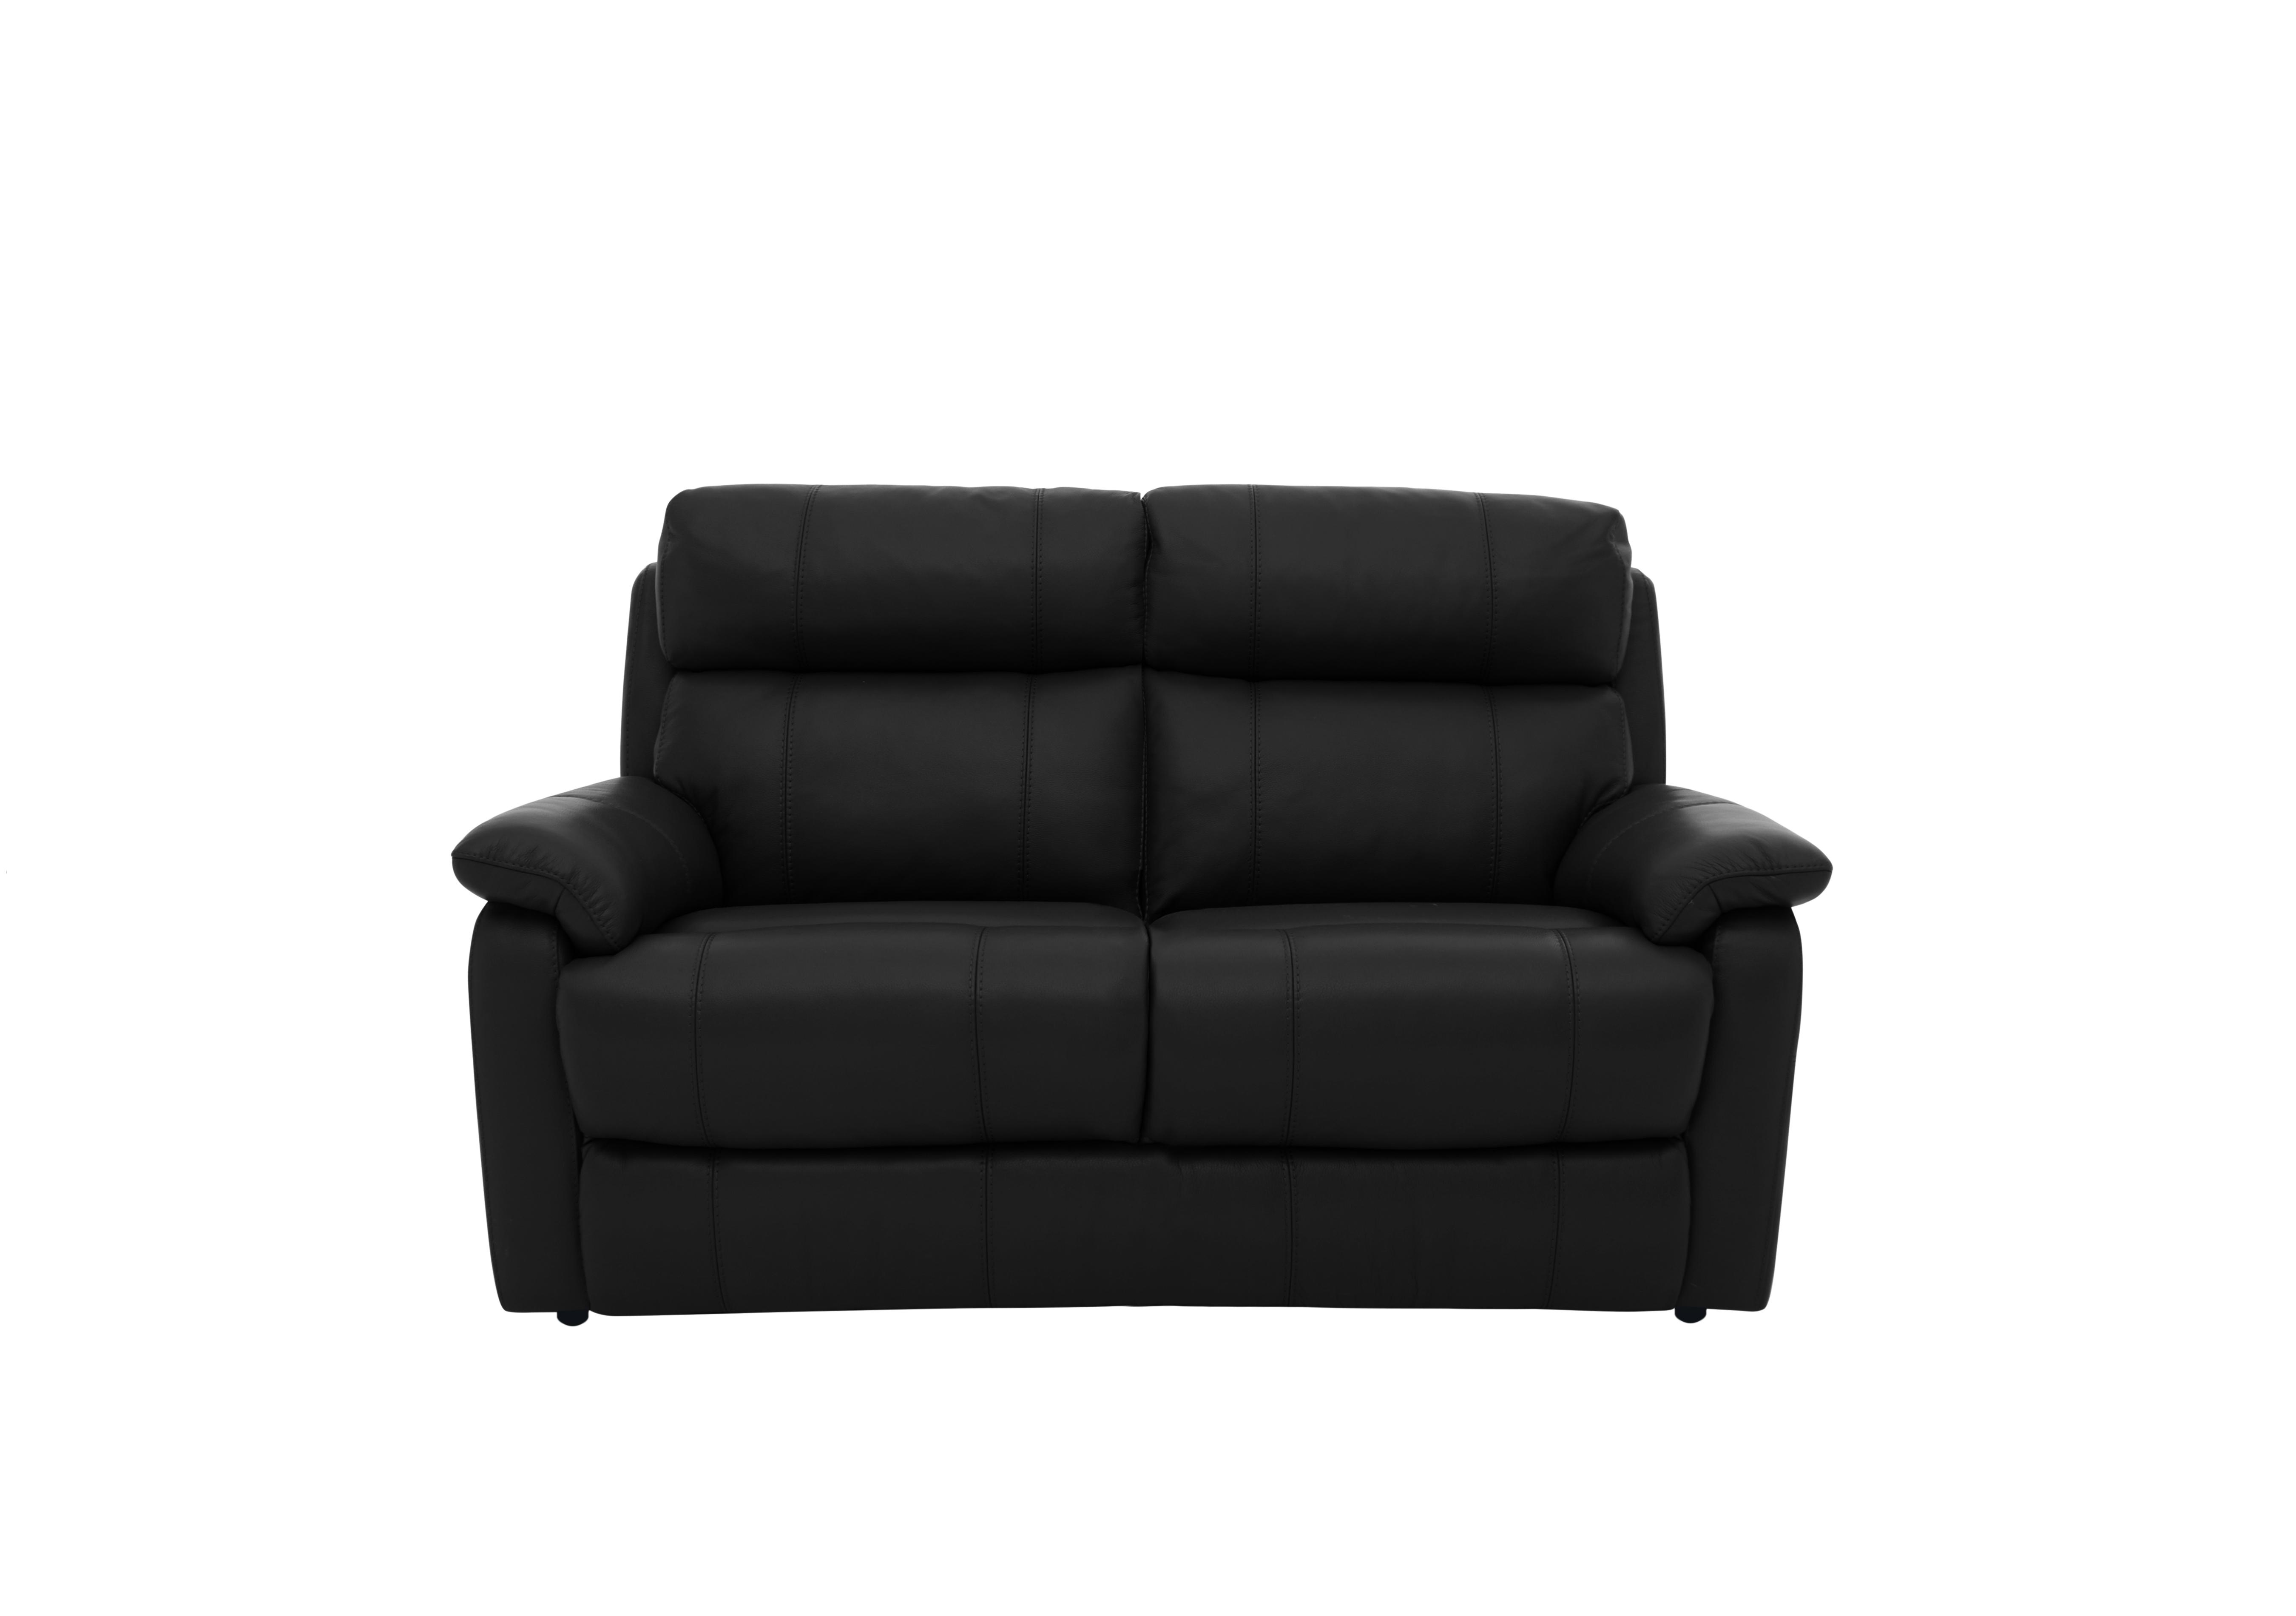 Relax Station Komodo 2 Seater Leather Sofa in Bv-3500 Classic Black on Furniture Village